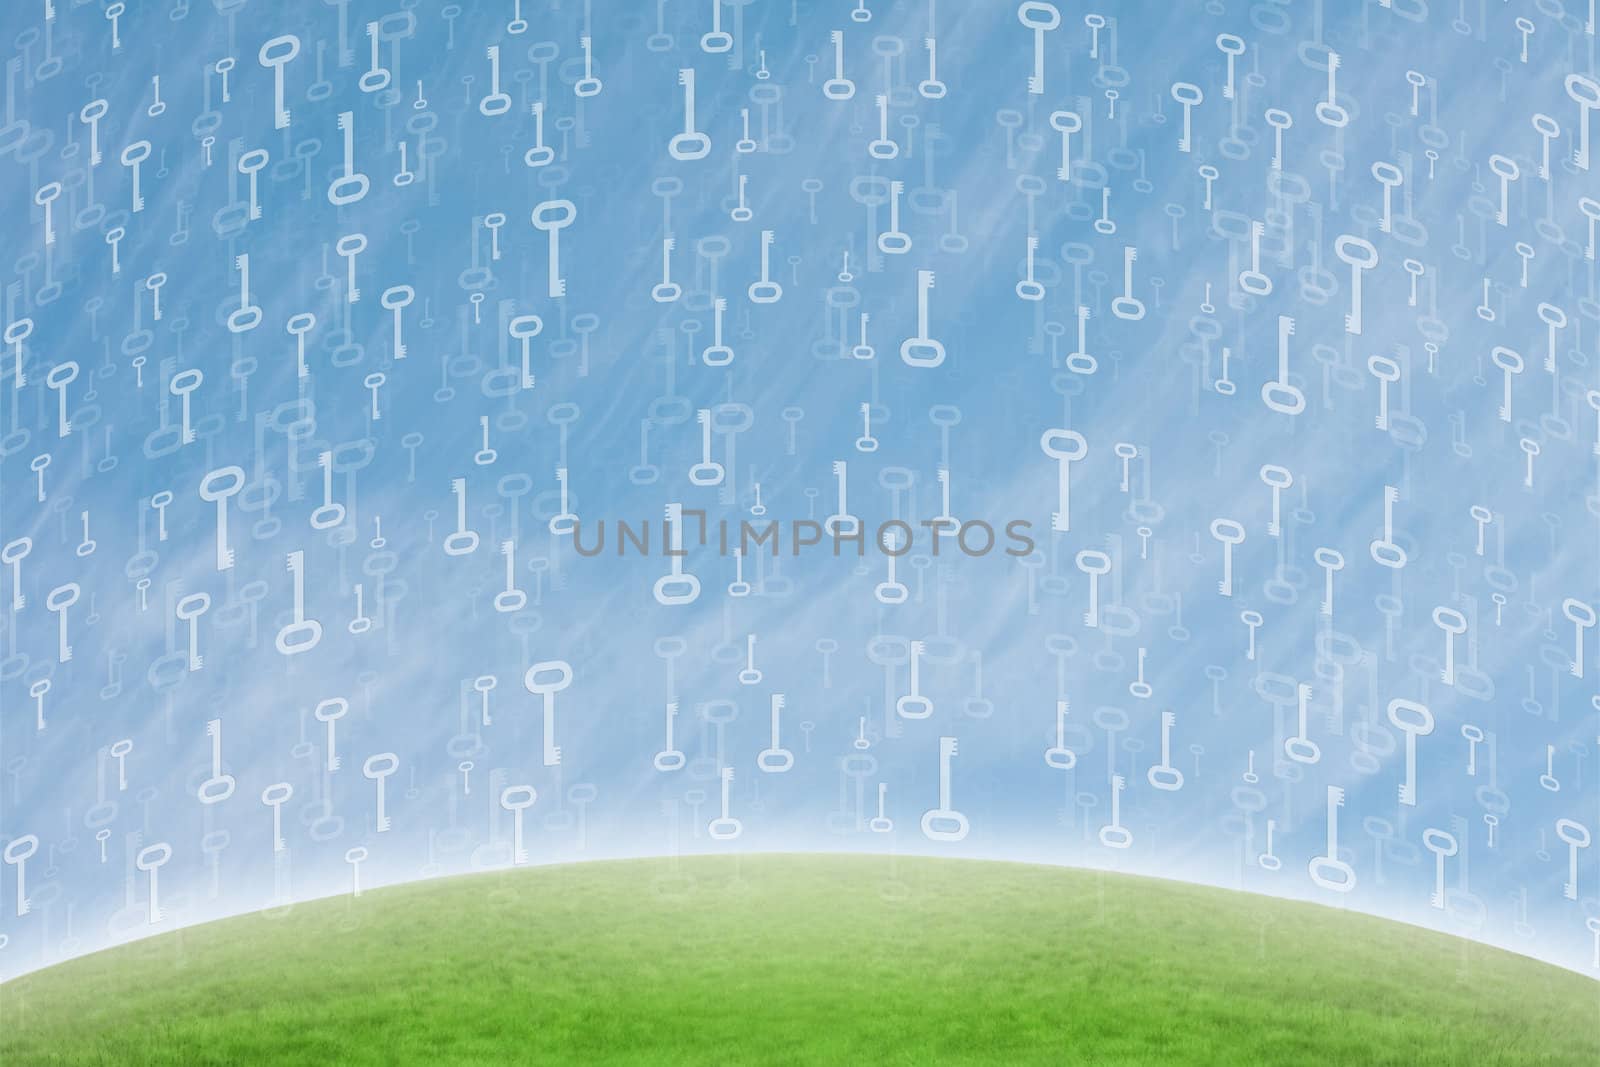 Concept background with real estate old keys floating all over the canvas with a vivid green slope.